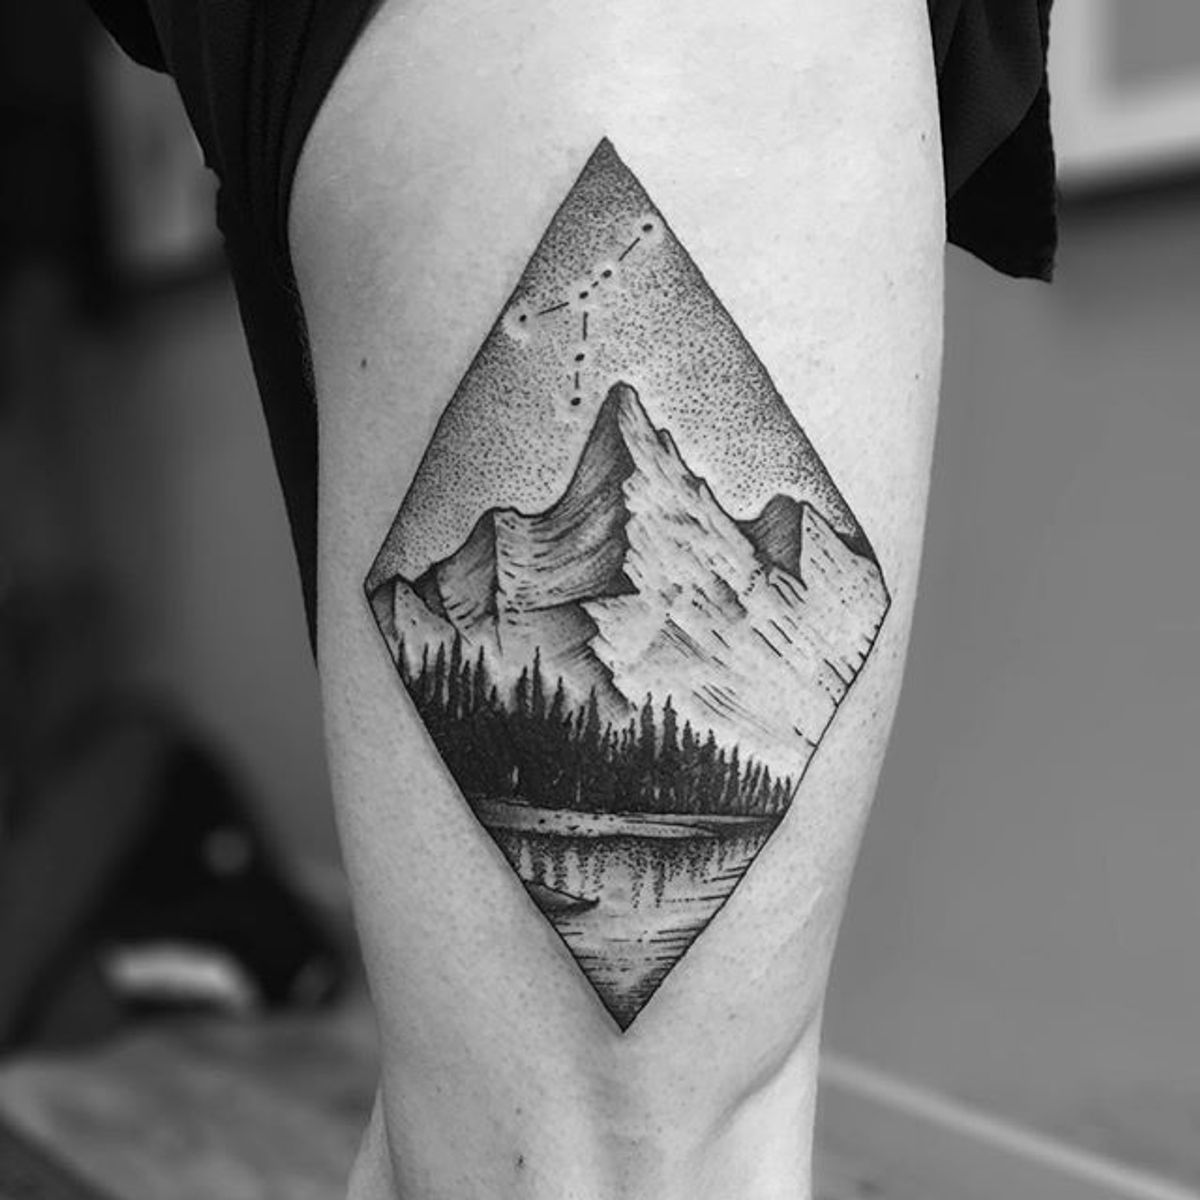 Tattoo uploaded by Robert Davies • Dotwork Landscape Tattoo by TomTom ...